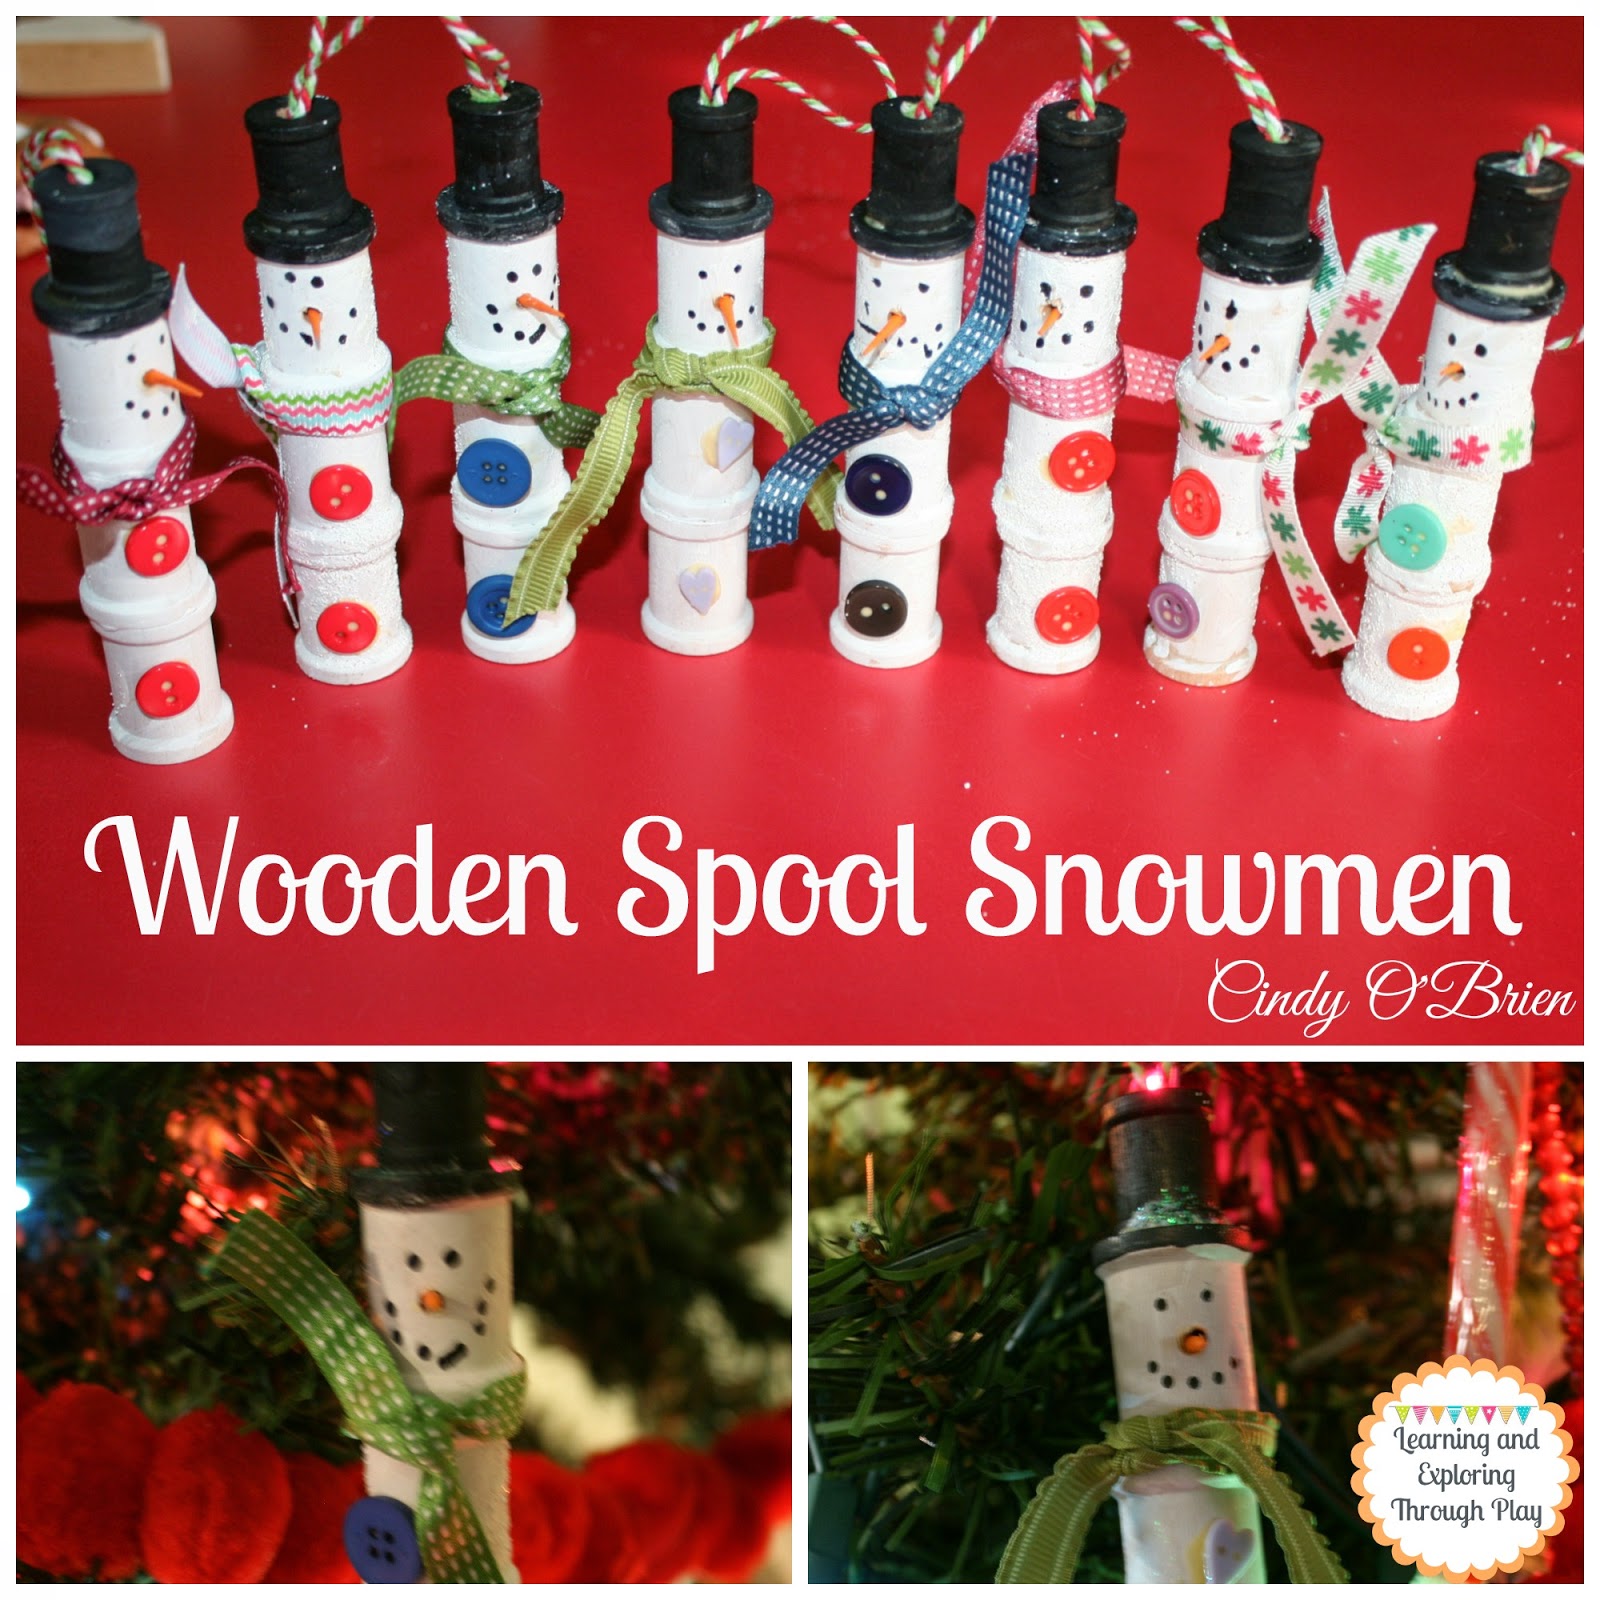 Learning and Exploring Through Play: Wooden Spool Snowmen